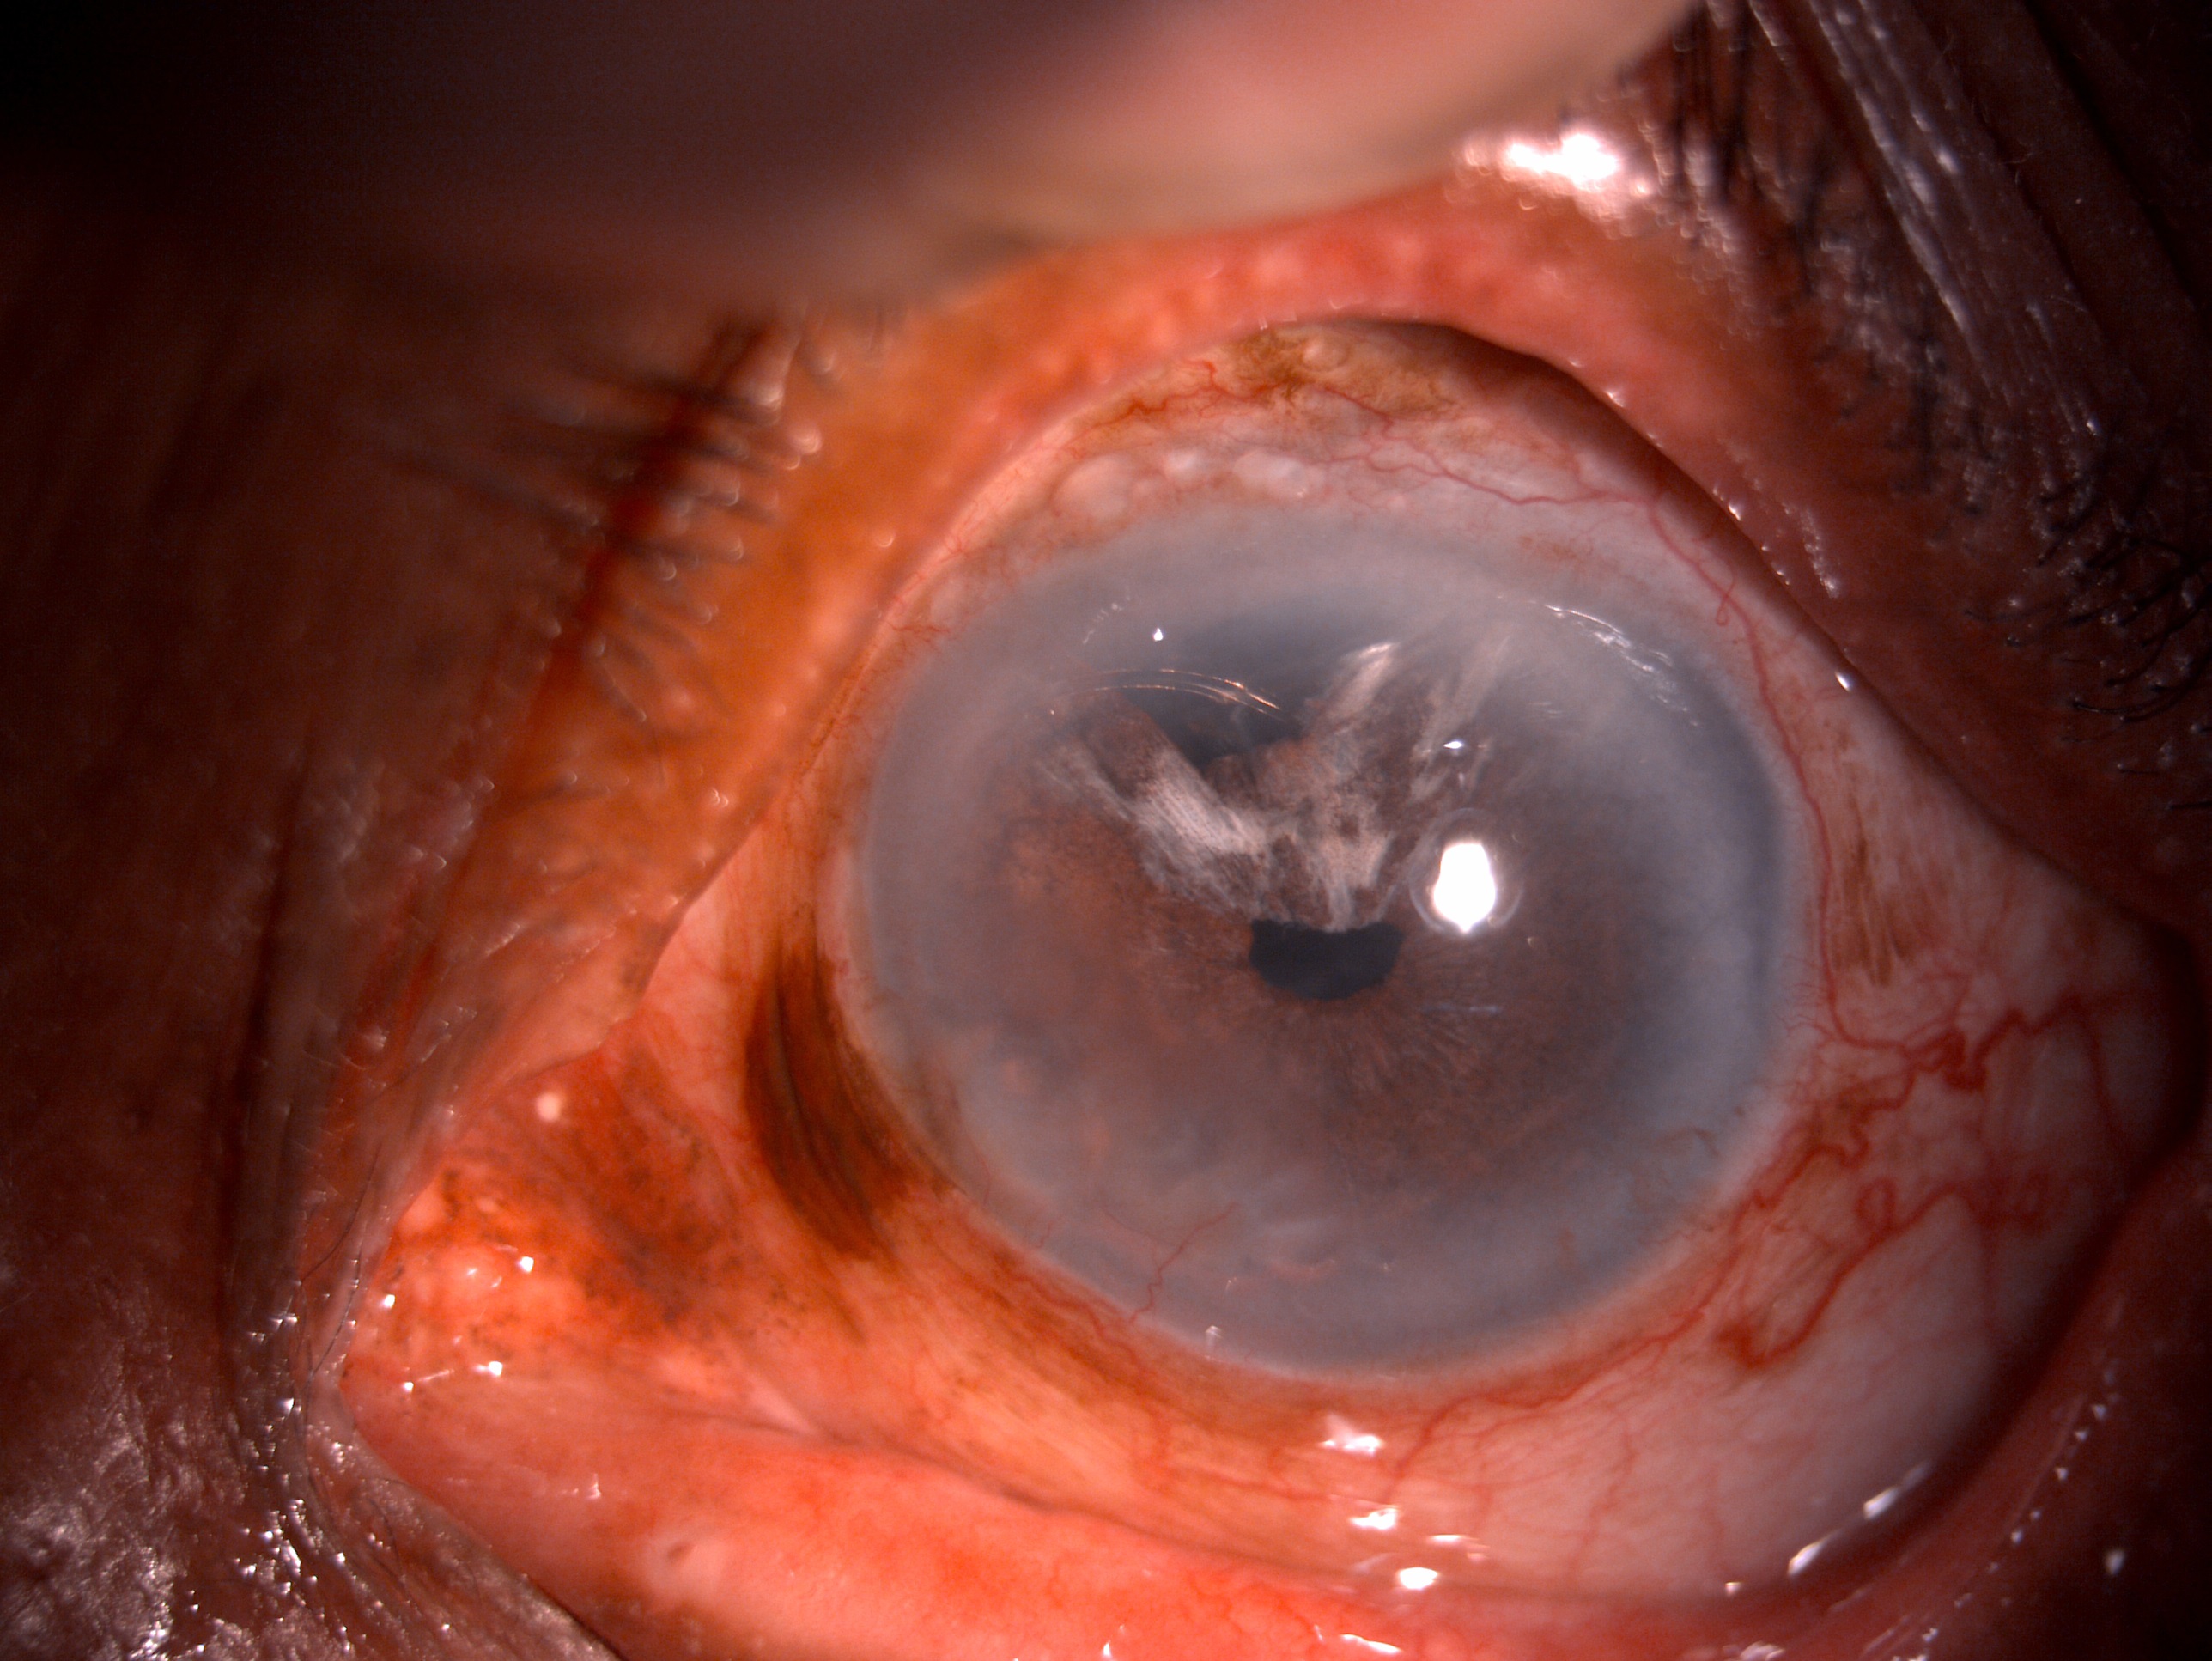 Slit lamp image of the patient depicting conjunctival congestion, superior two clock hour iridodialysis, iris chaffing and haptic of IOL extruding through the iridodialysis area